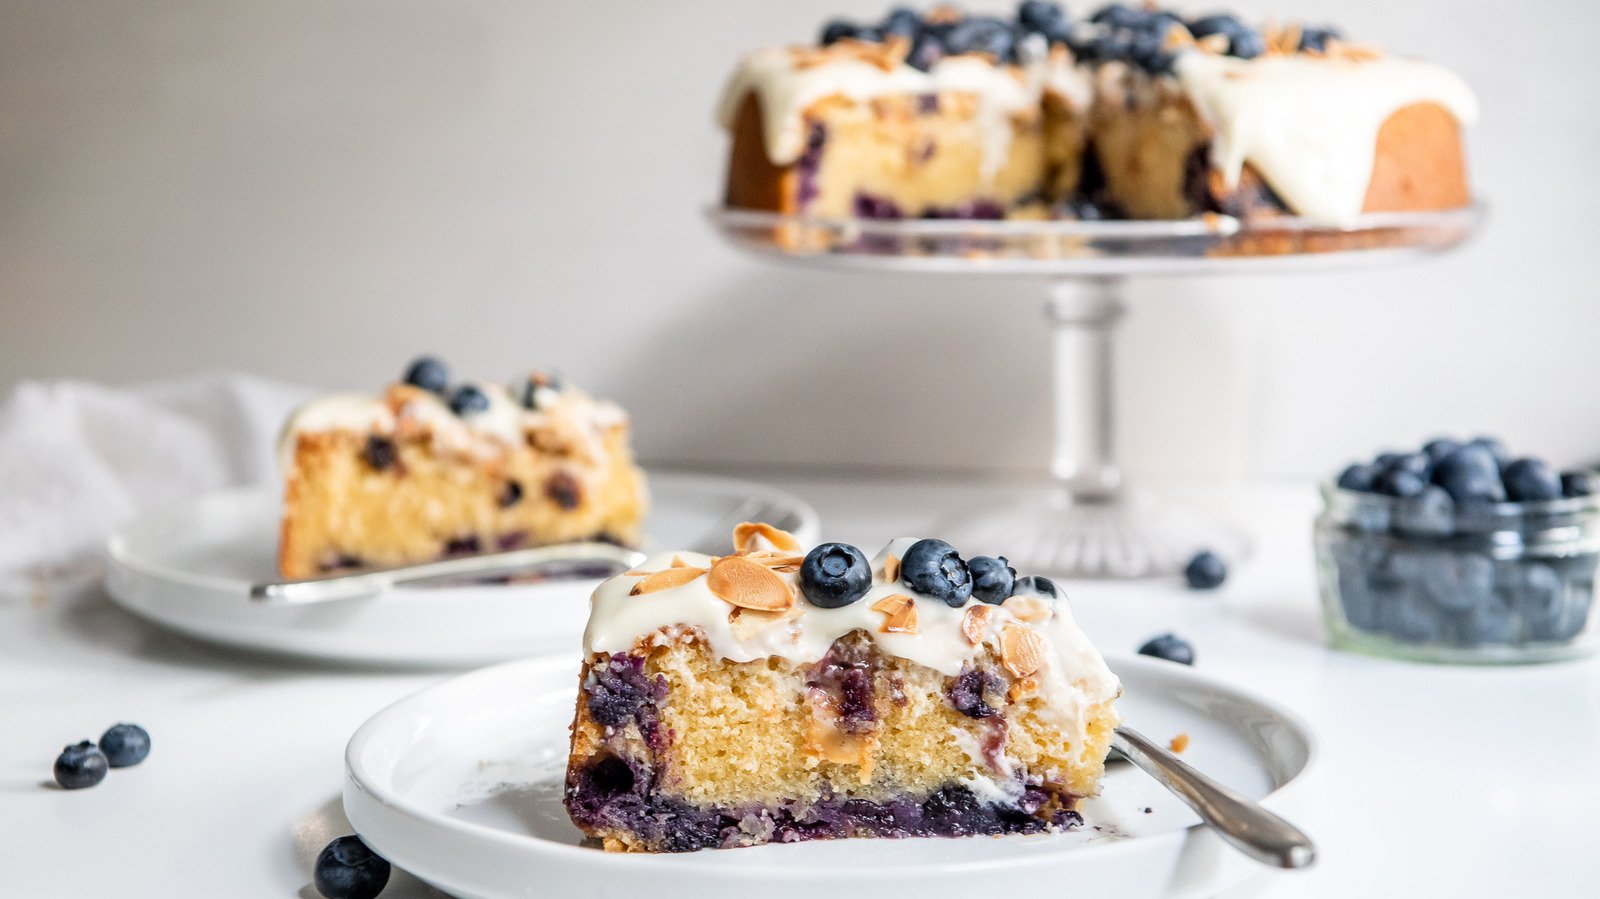 Blueberry Amaretto Cake Recipe Is One Of The Best Recipes You'll Ever Try